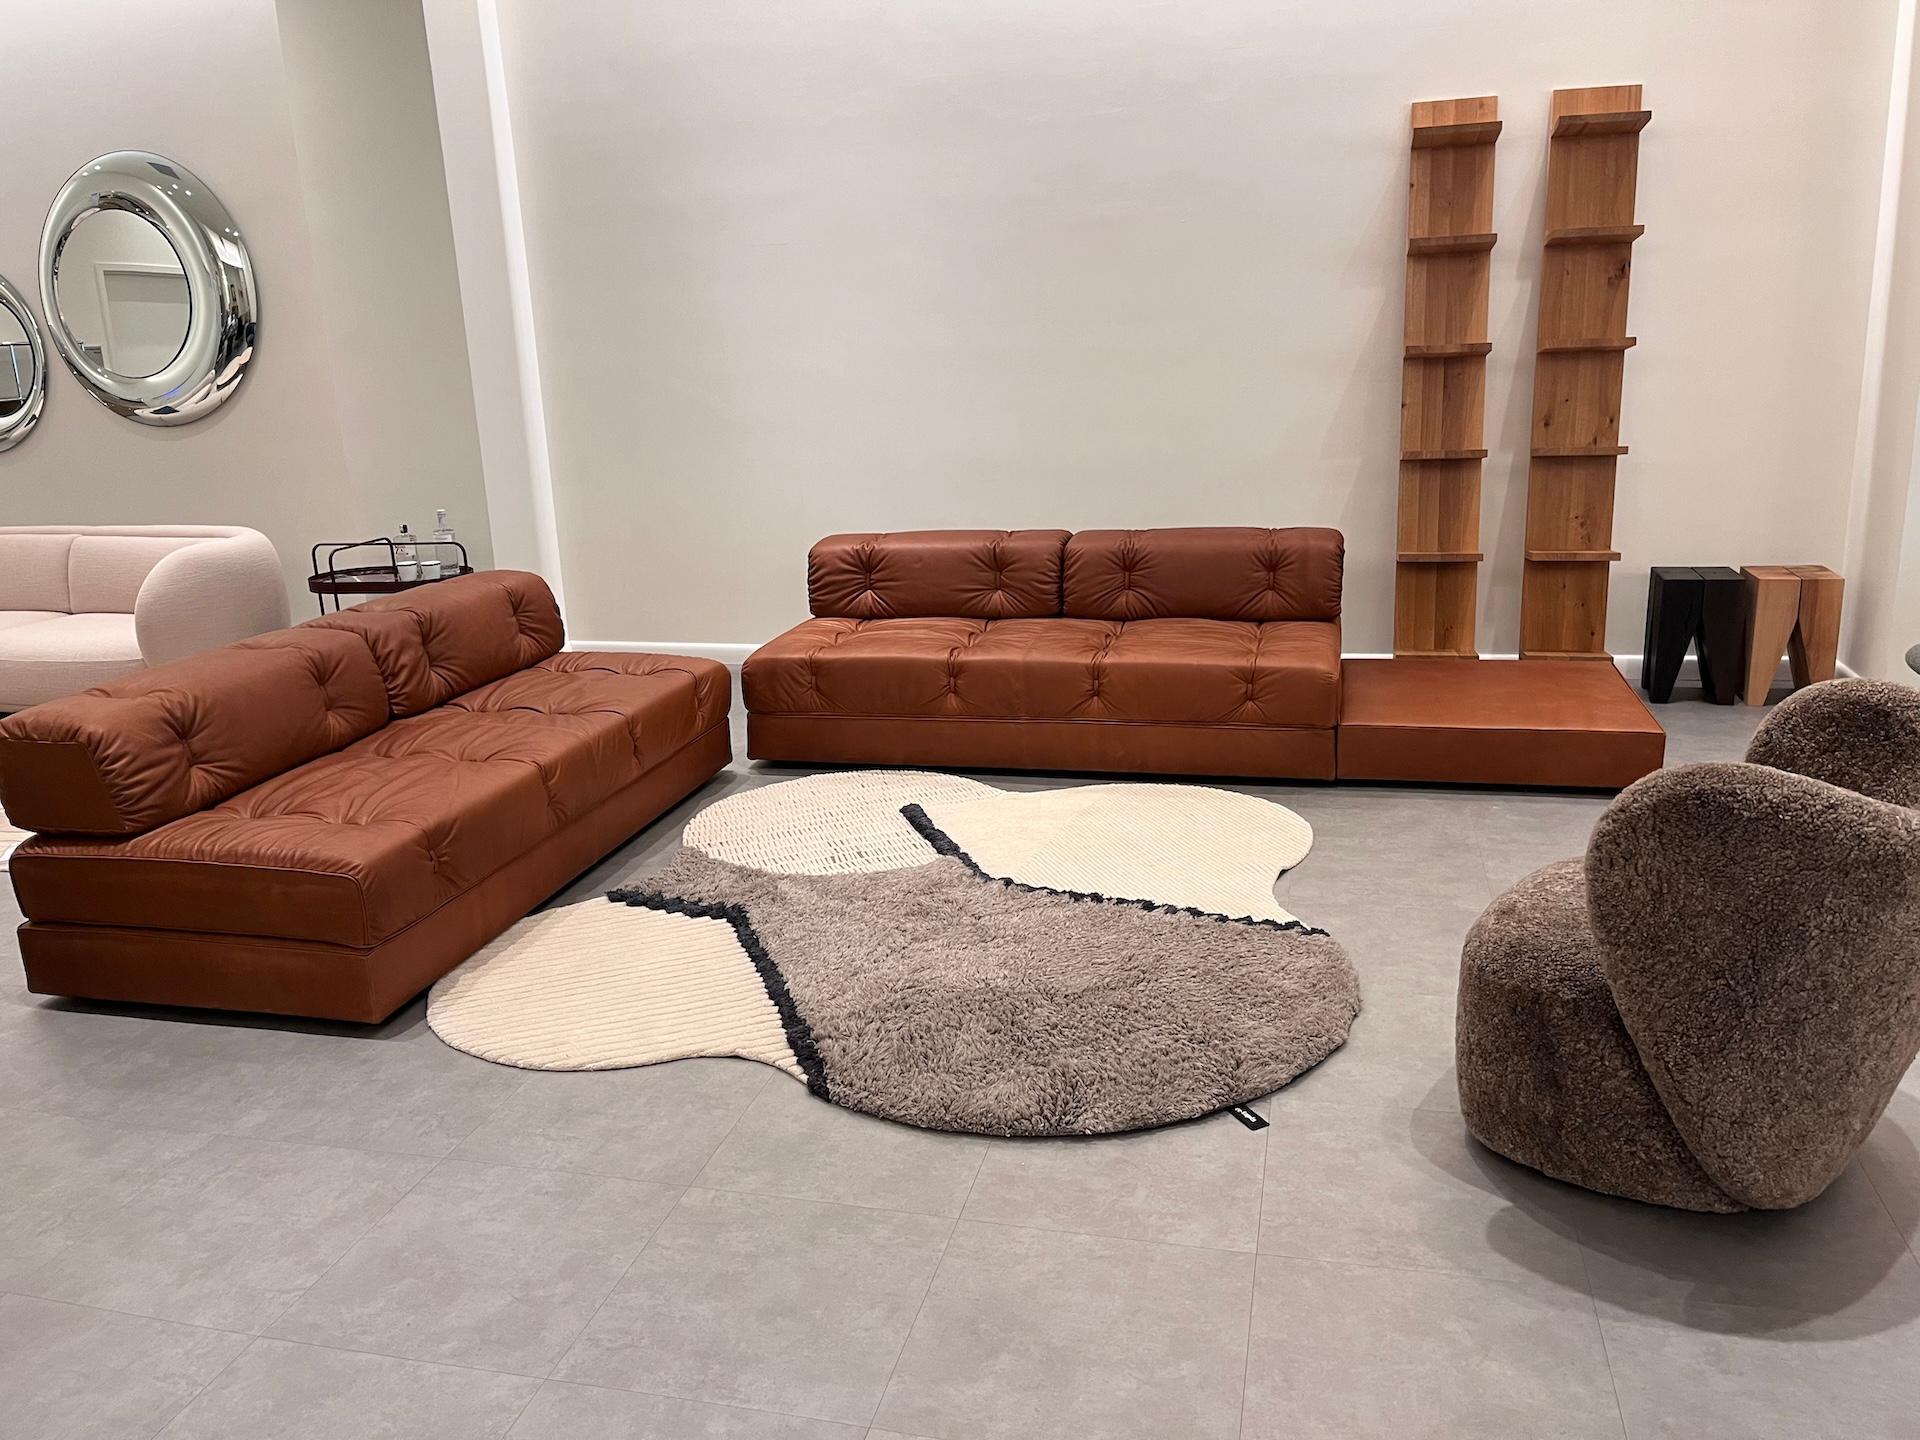 Wittmann Leather Atrium Sofa Bed with Tray Element by Wittmann Workshop in STOCK 7